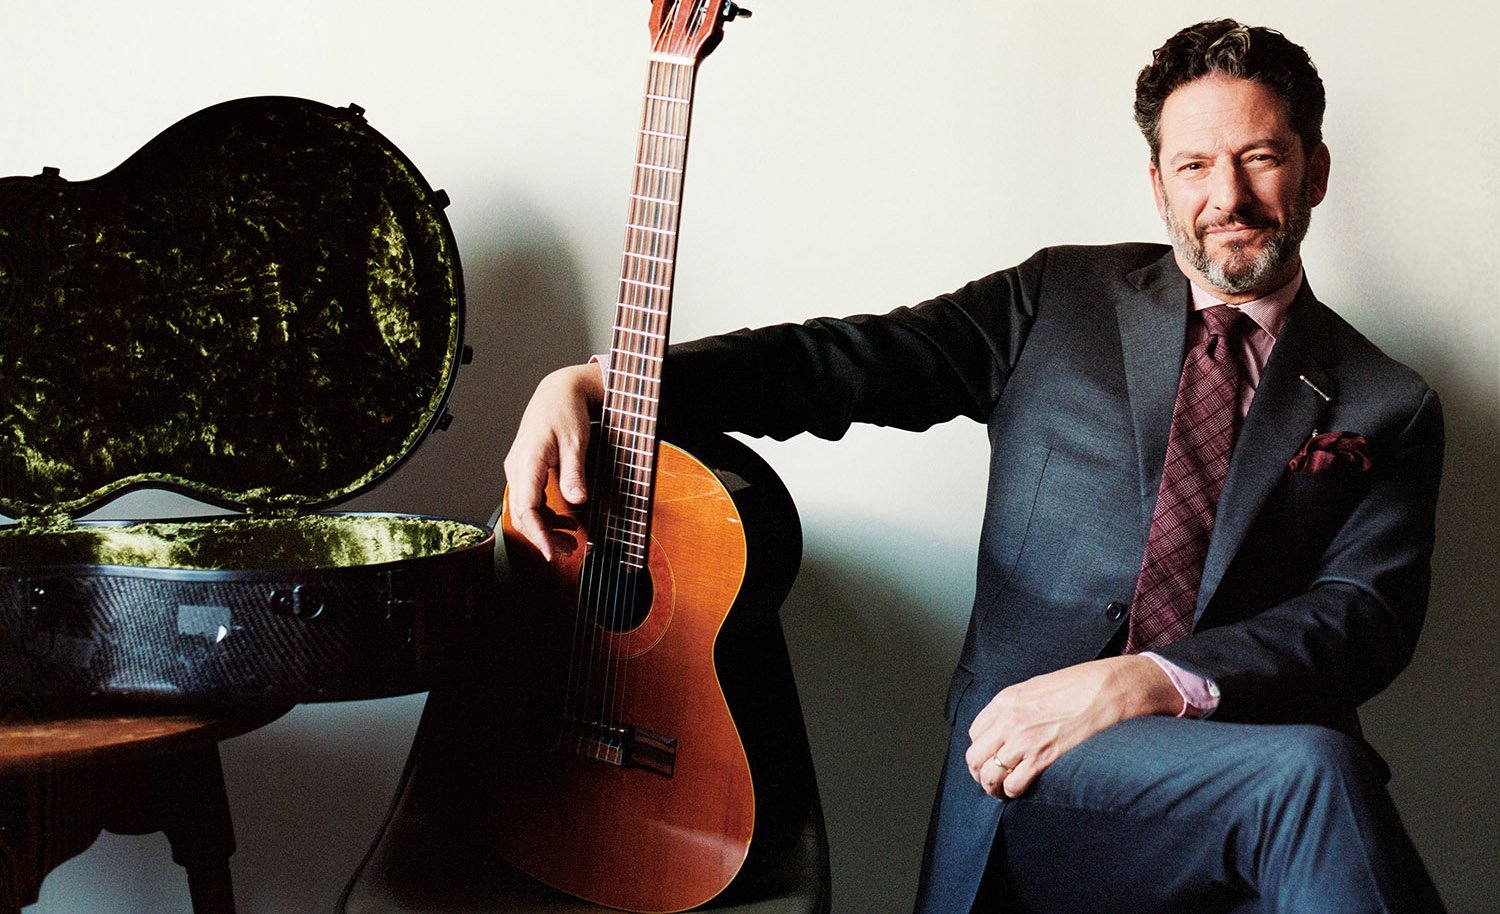 John Pizzarelli seated in a blue suit, right arm outstretched around his guitar, positioned upright, posed next to a rugged, open guitar case.